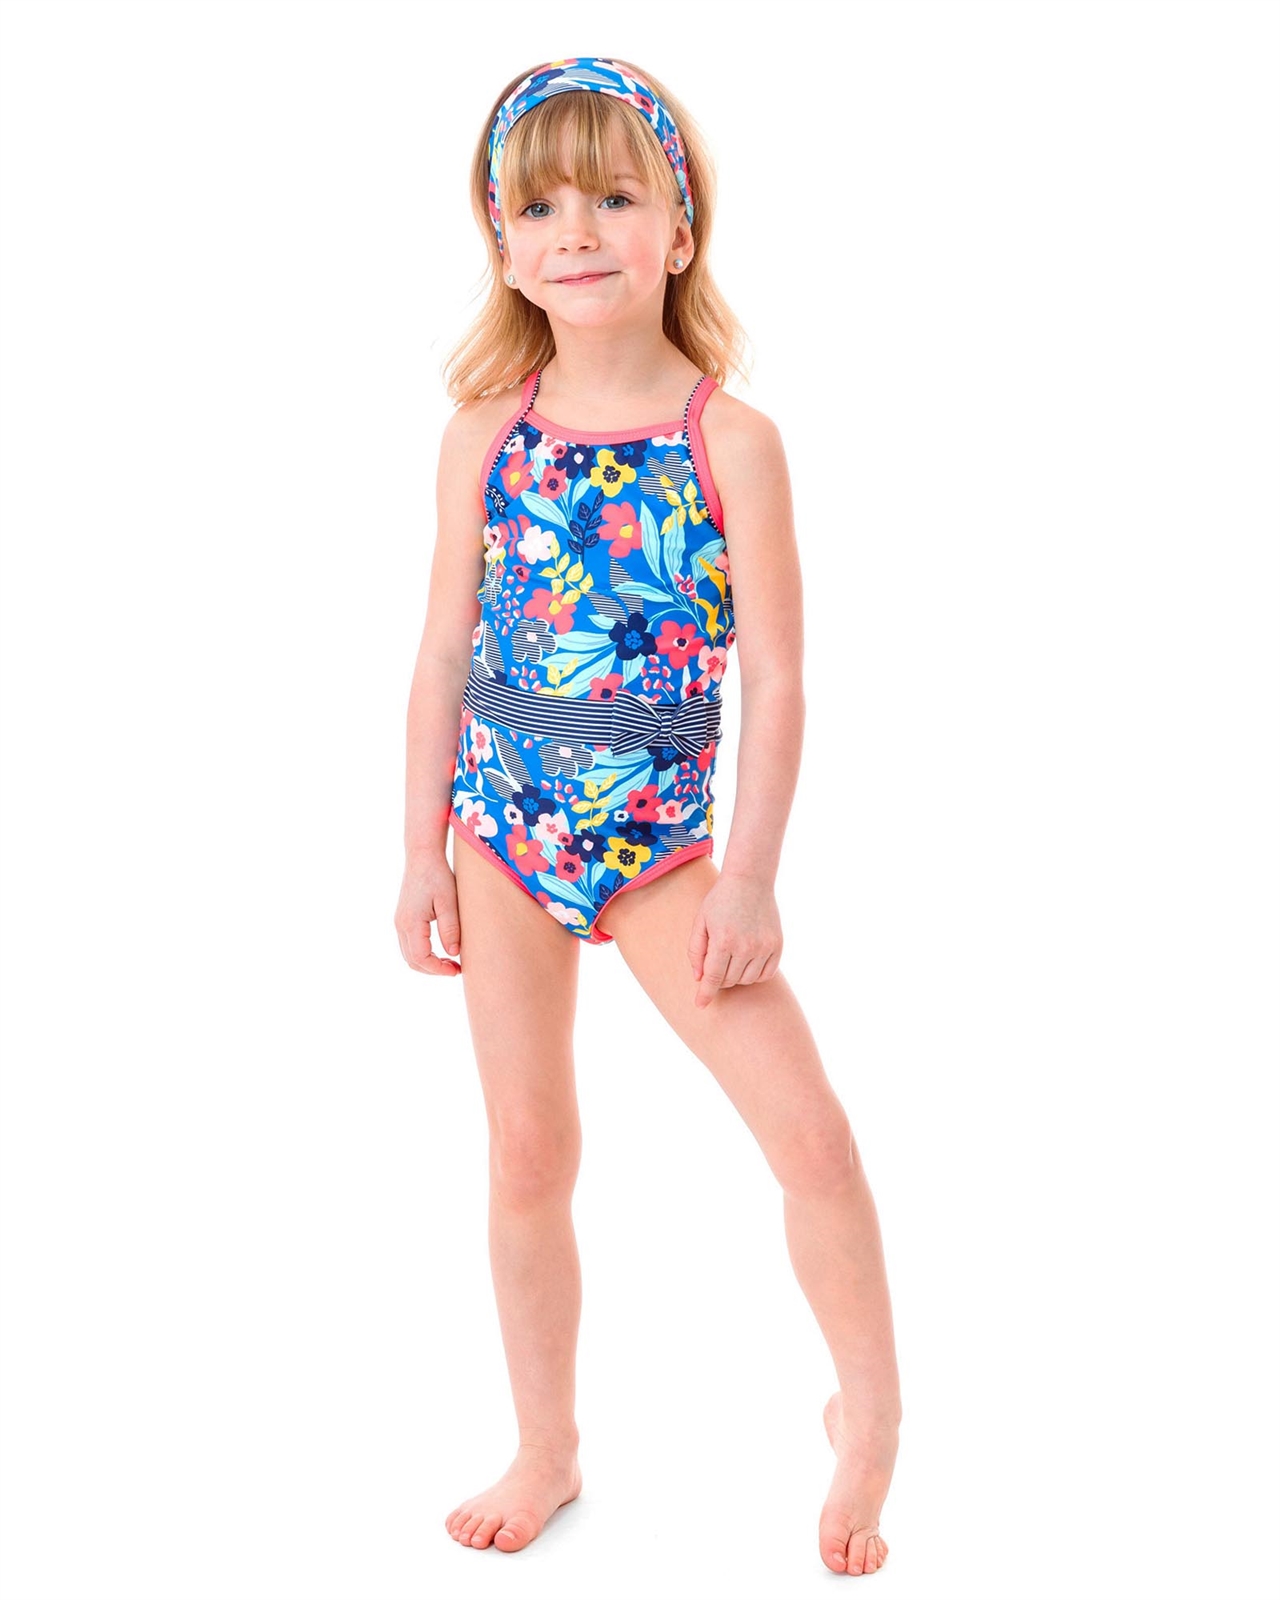 Nano Girls One-piece Swimsuit in Floral Print - Nano Spring/Summer 2021 ...